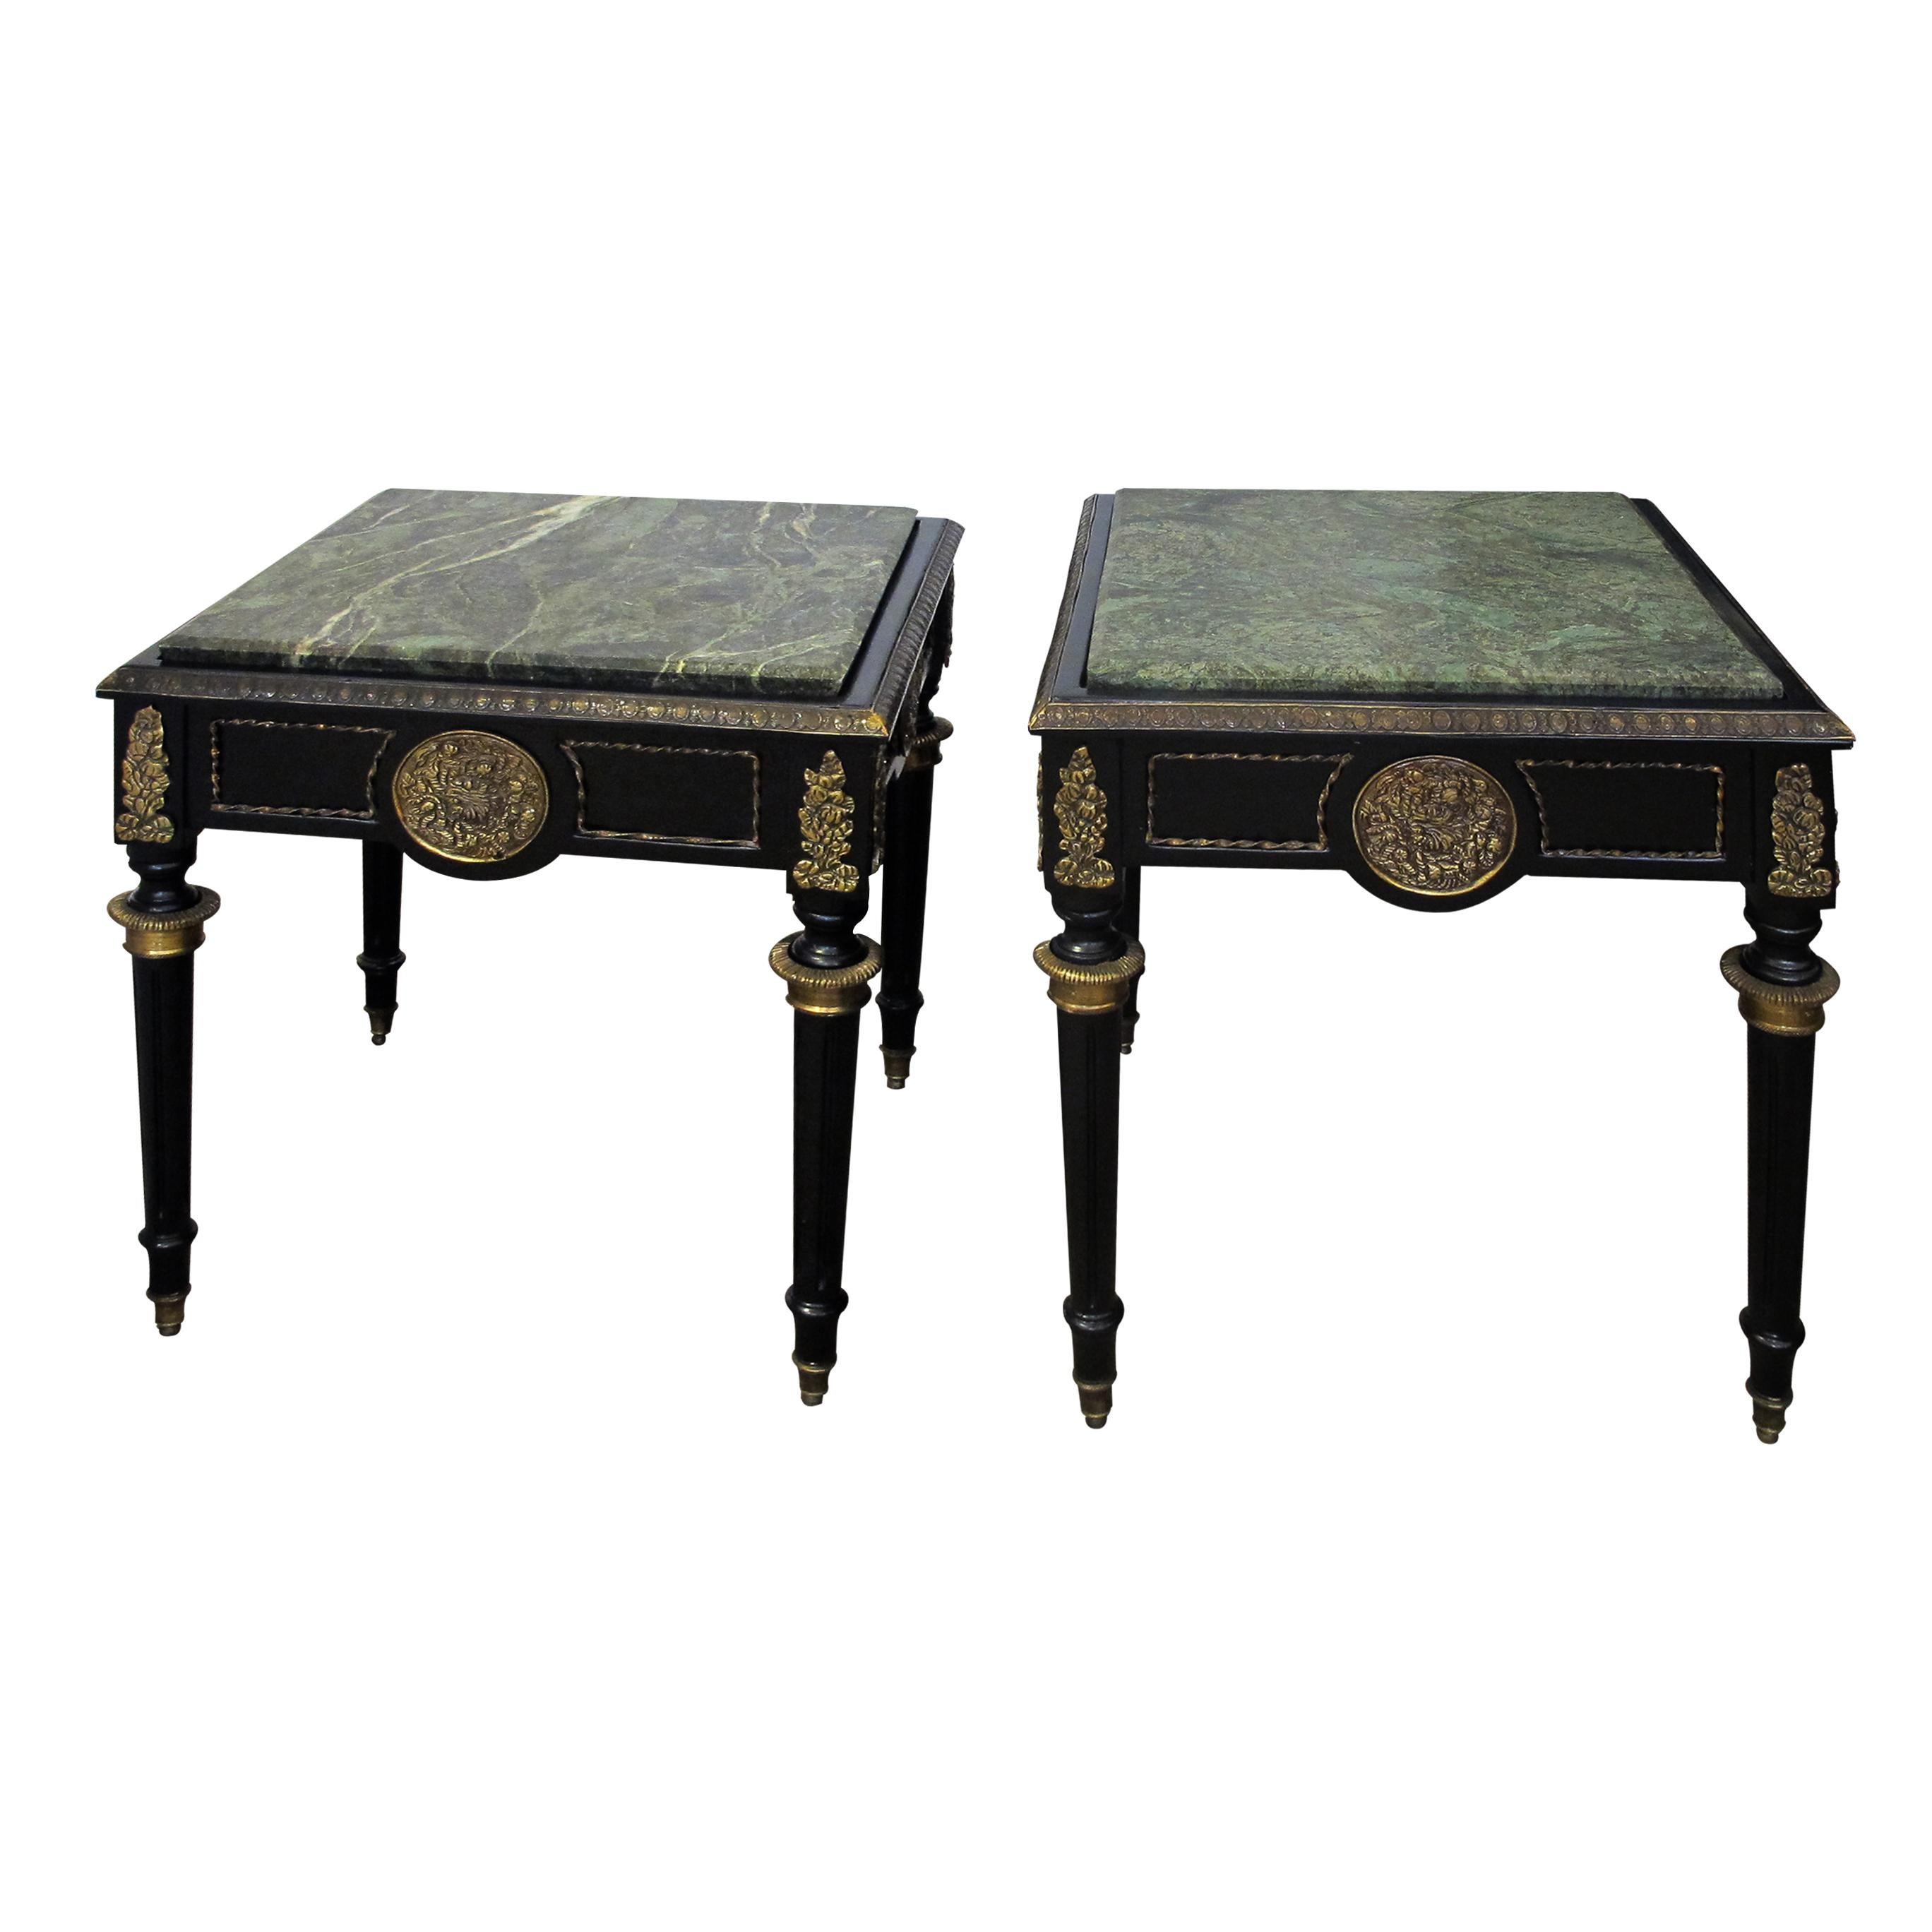 An elegant pair of mid century French black side tables with green marble inserted into their tops. The side tables are decorated with bronze gilded 'ormolus’ and presented on four tapered legs with bronze gilded collarette fittings and brass caps